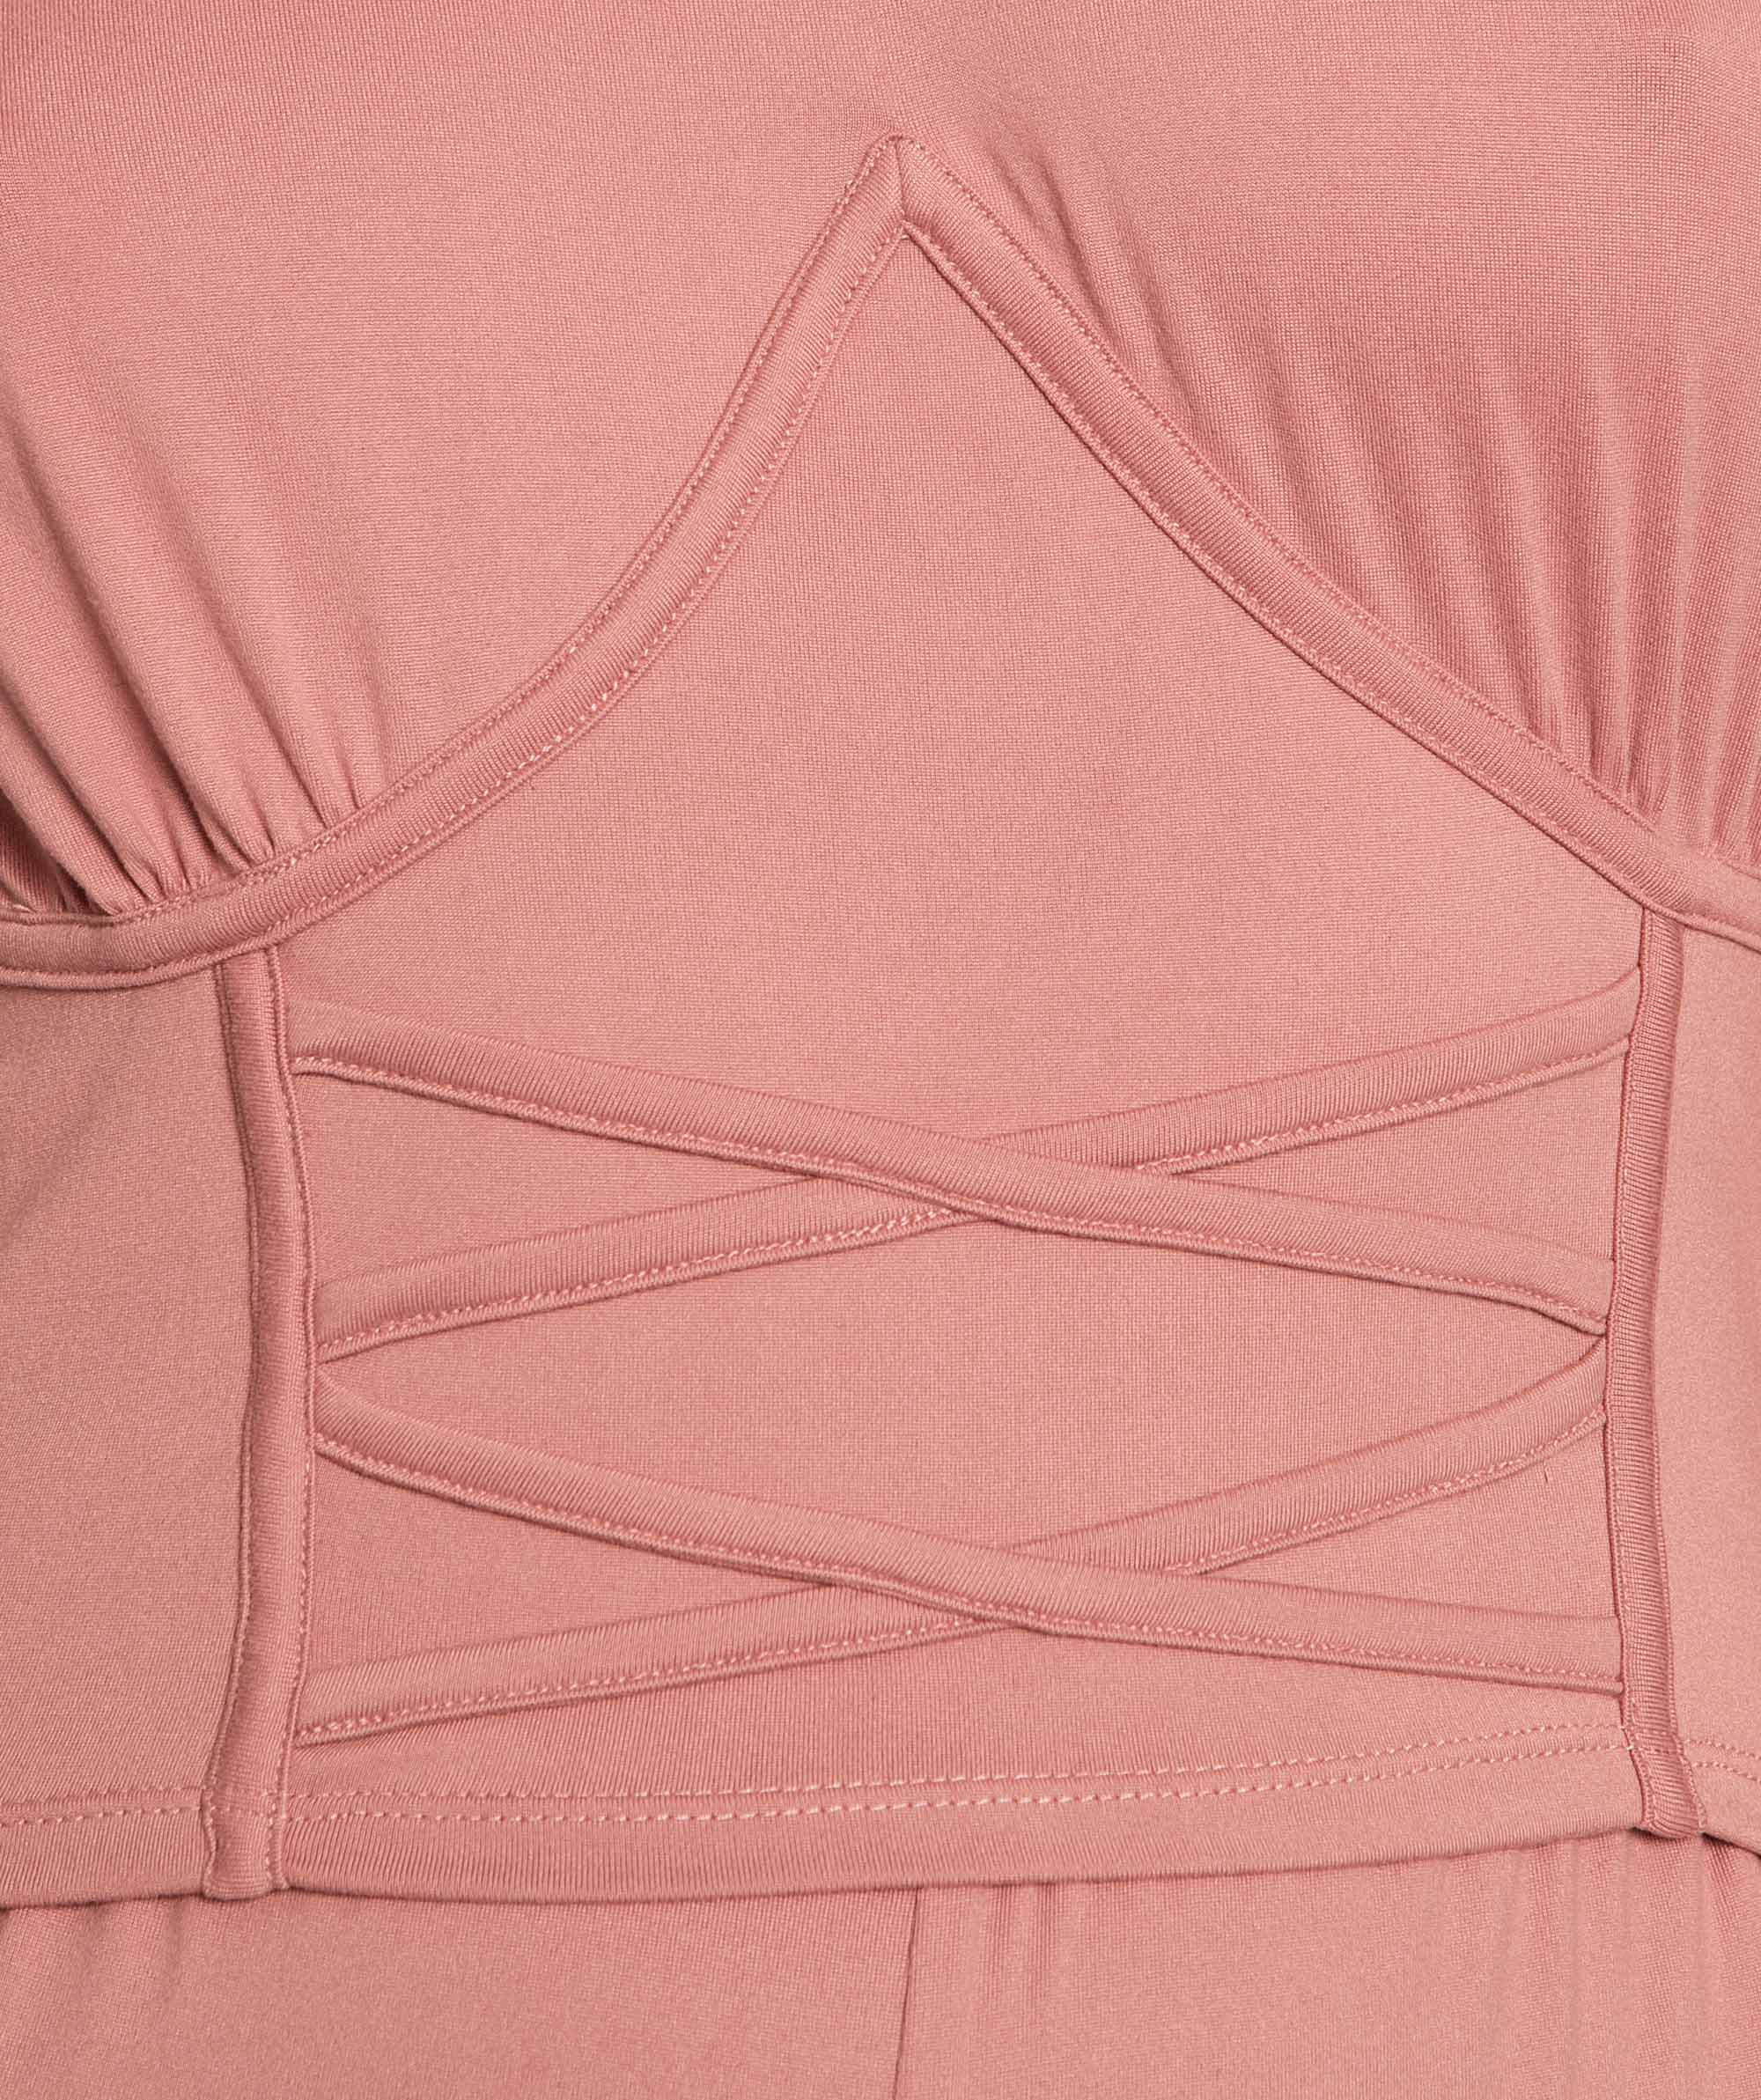 Style By Day Long Sleeve Corset - Pink